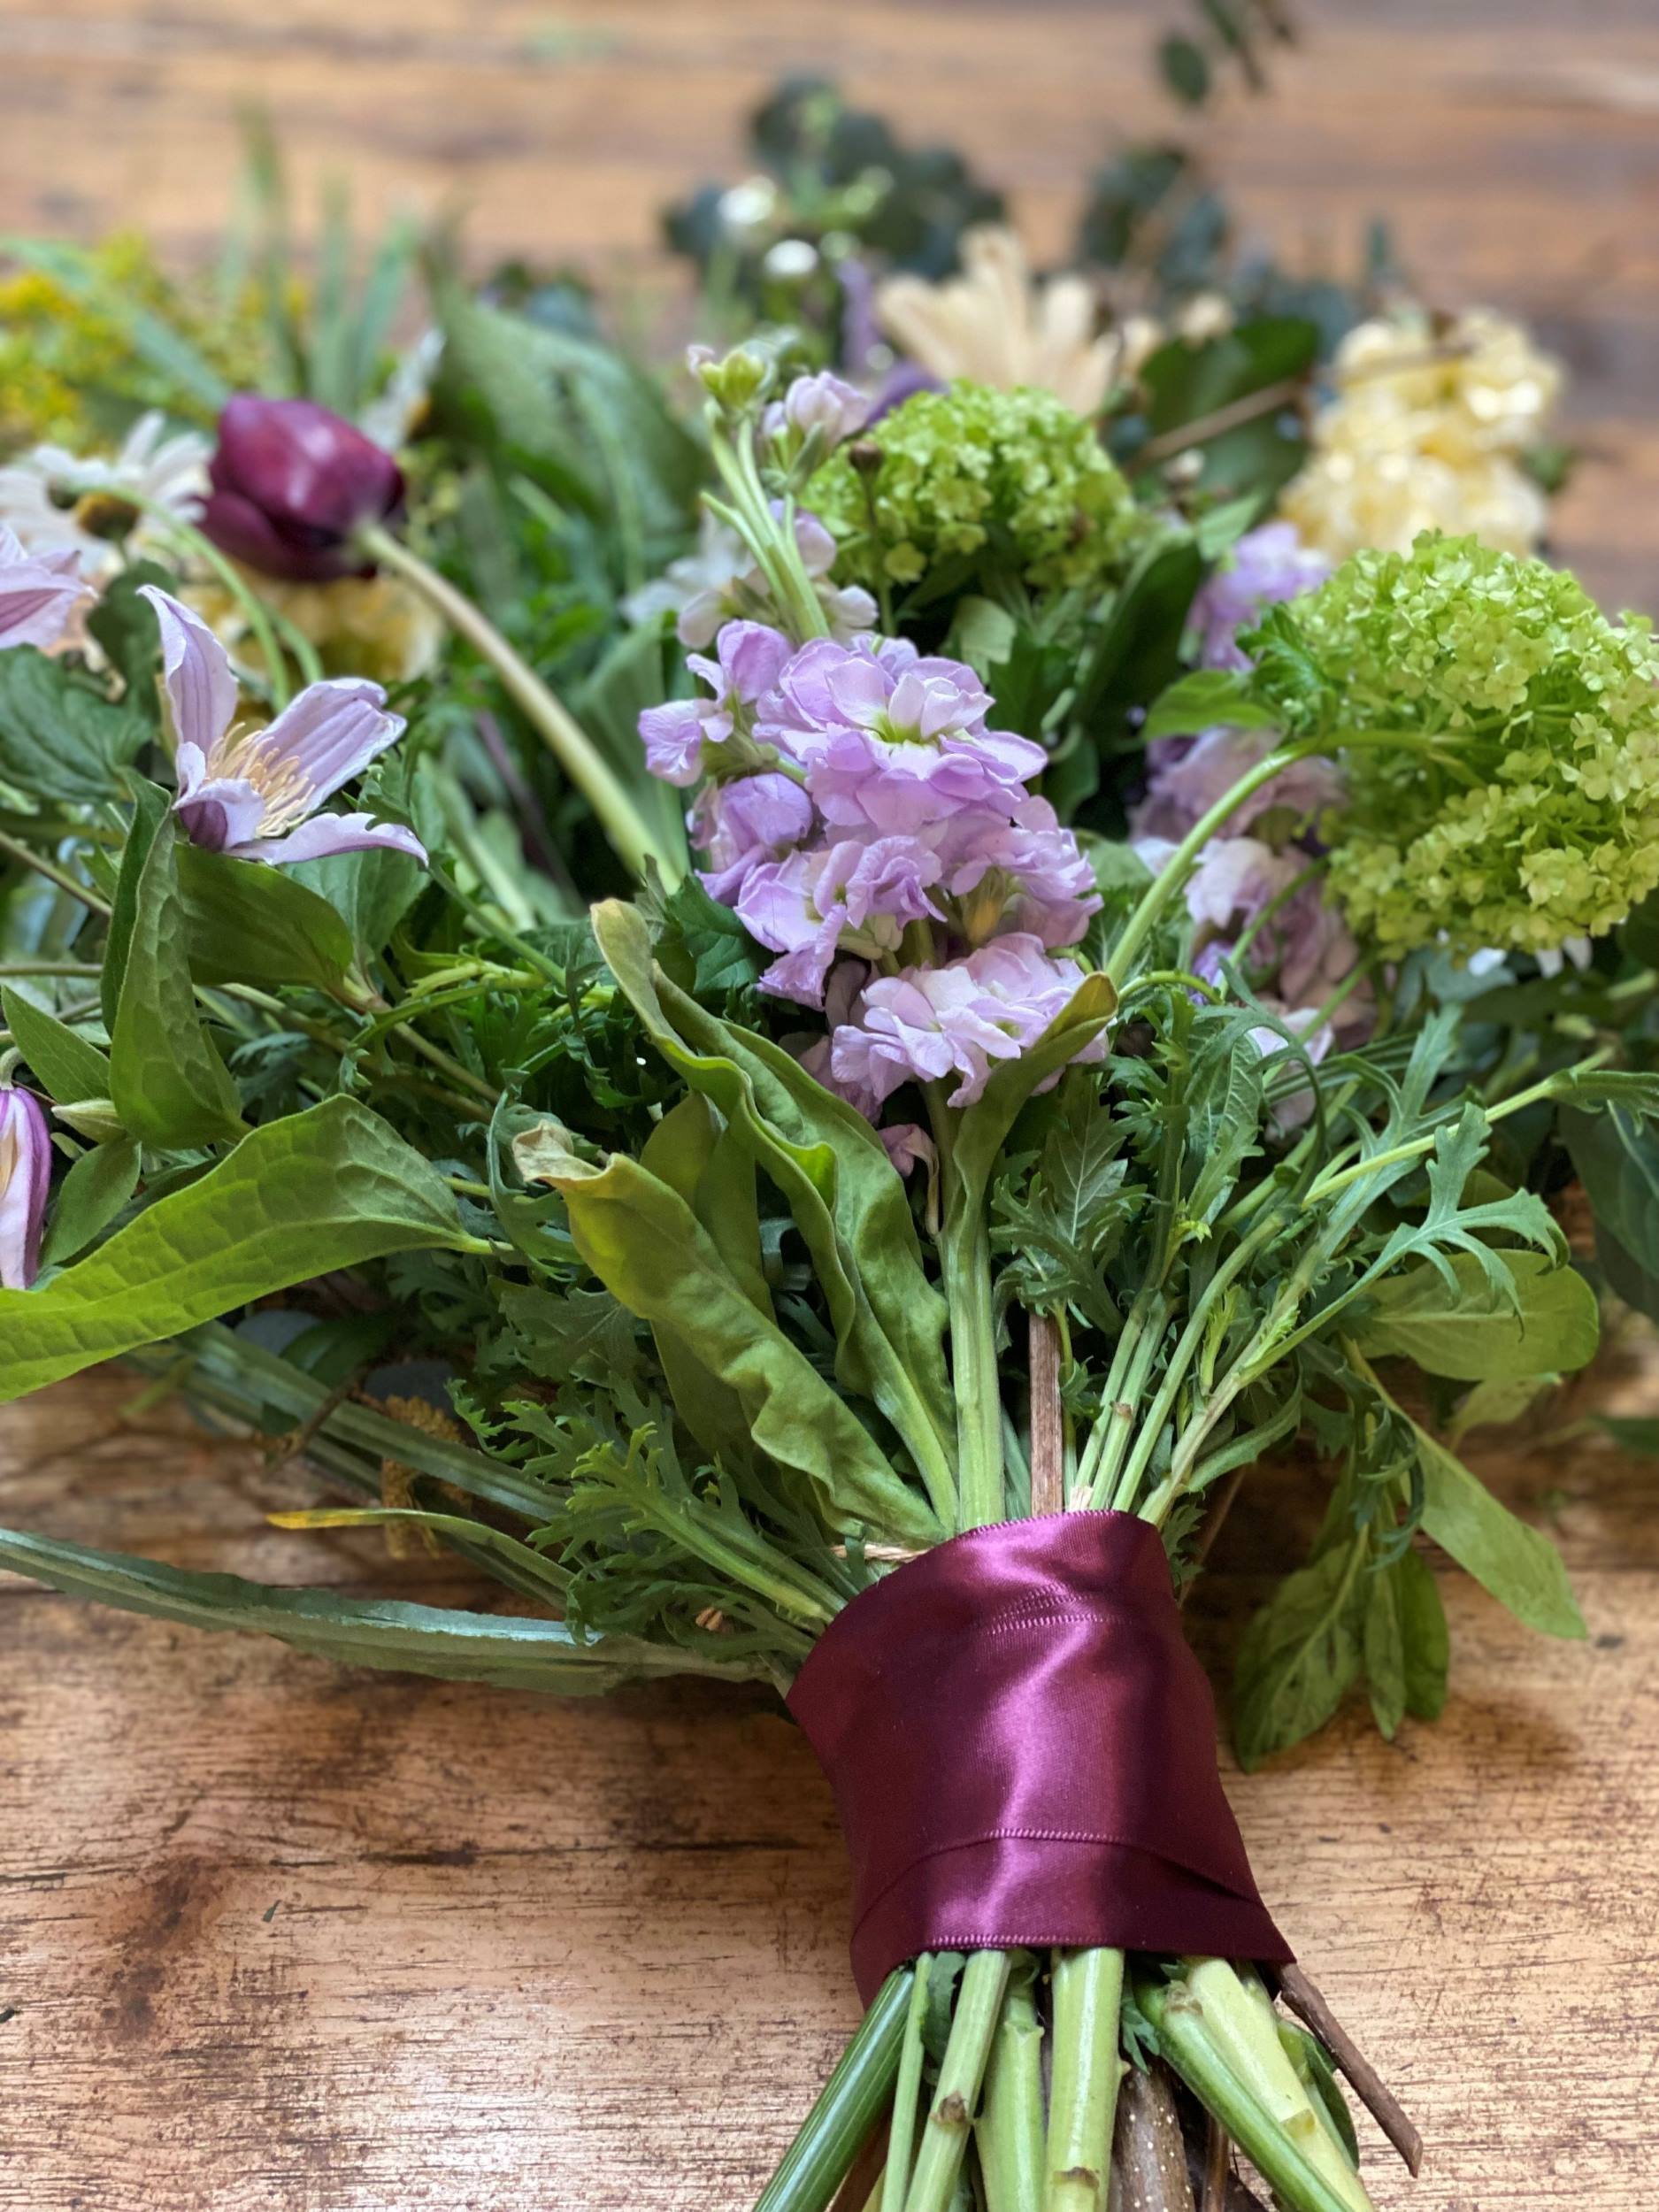 Naturally styled funeral sheaf with spring flowers